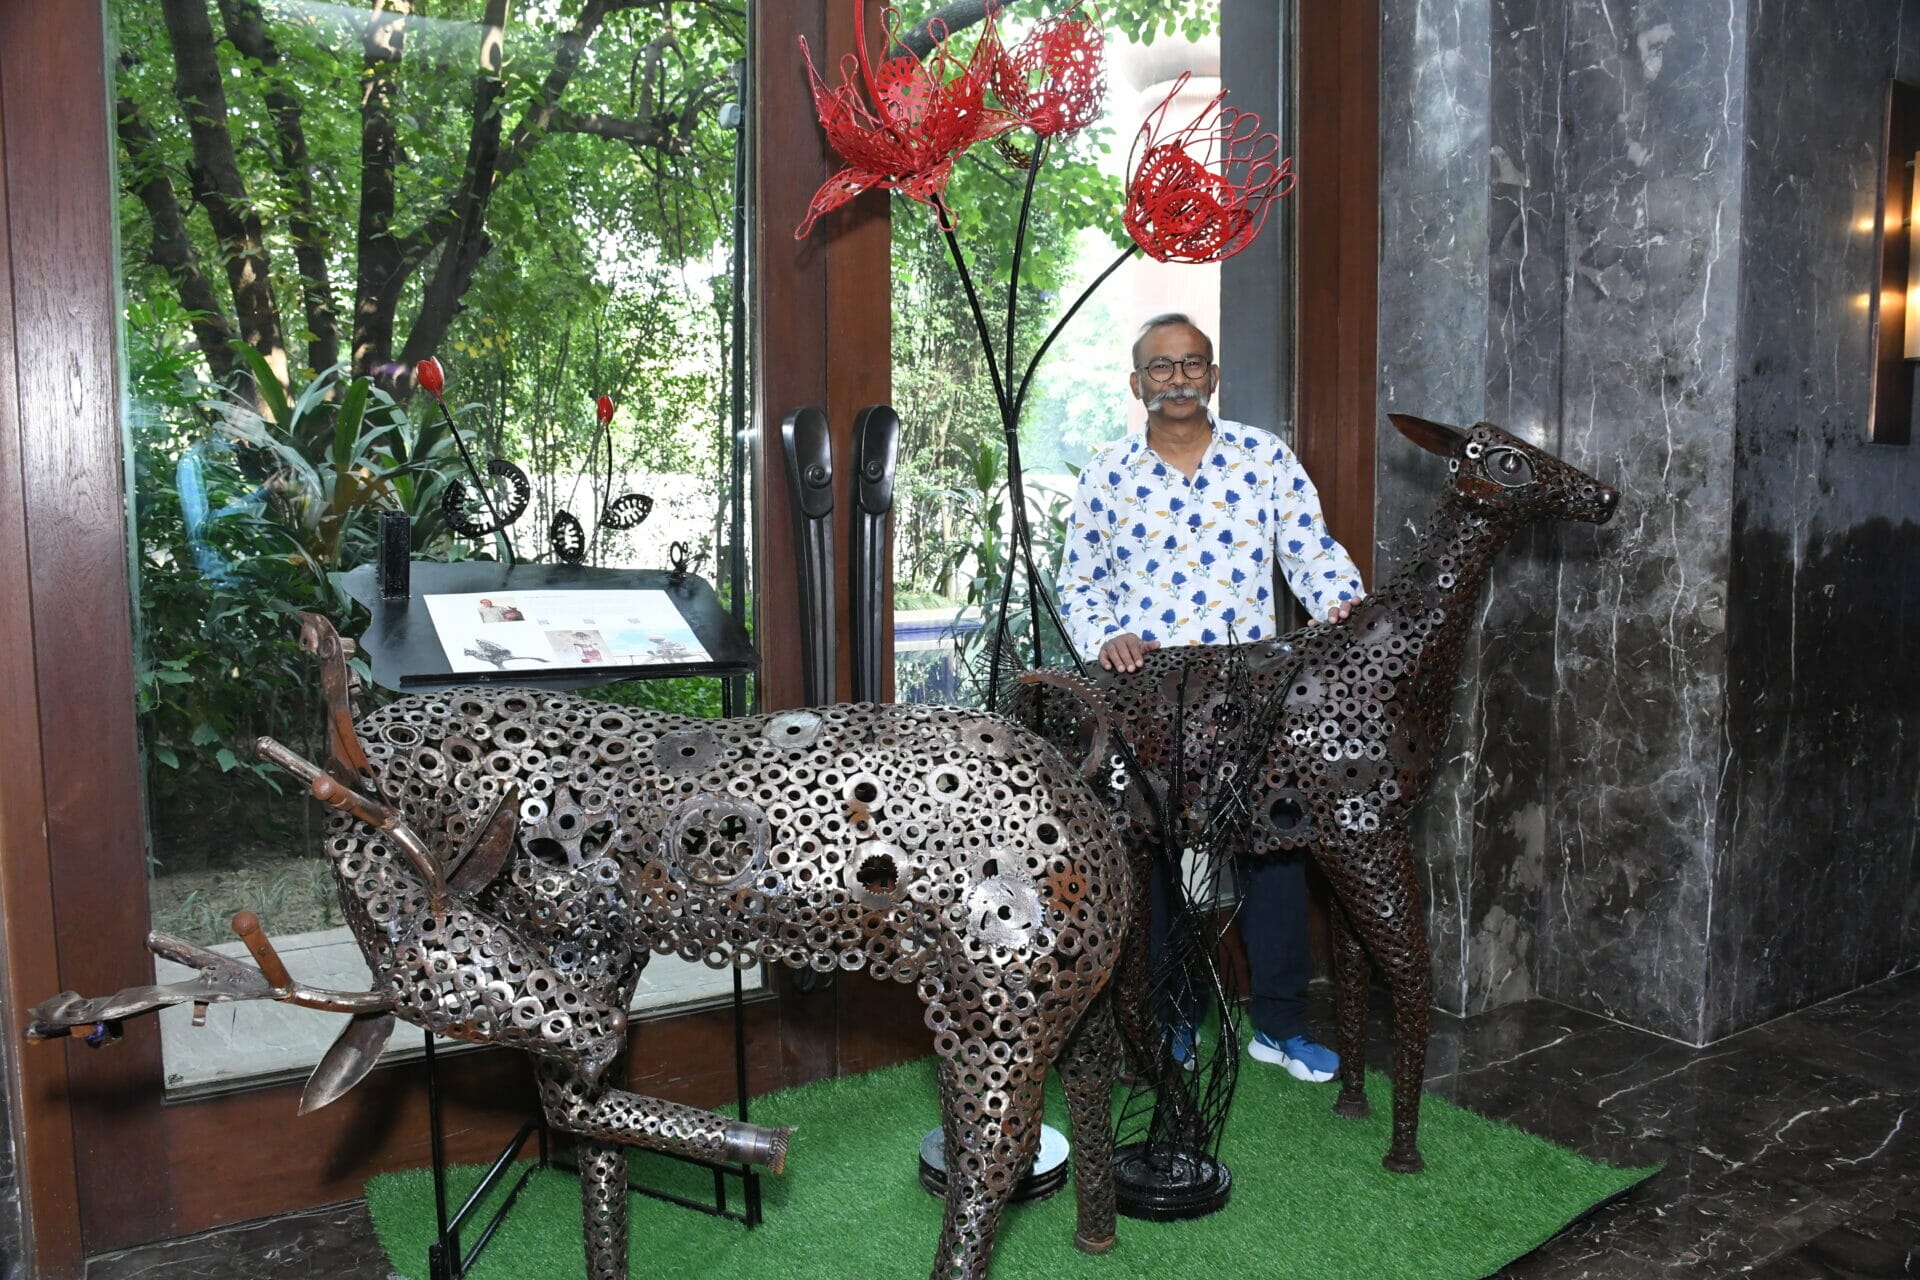 Artist Gopal Namjosh meticulously crafted metal installation made it to the TDJ architecture exhibition 2022